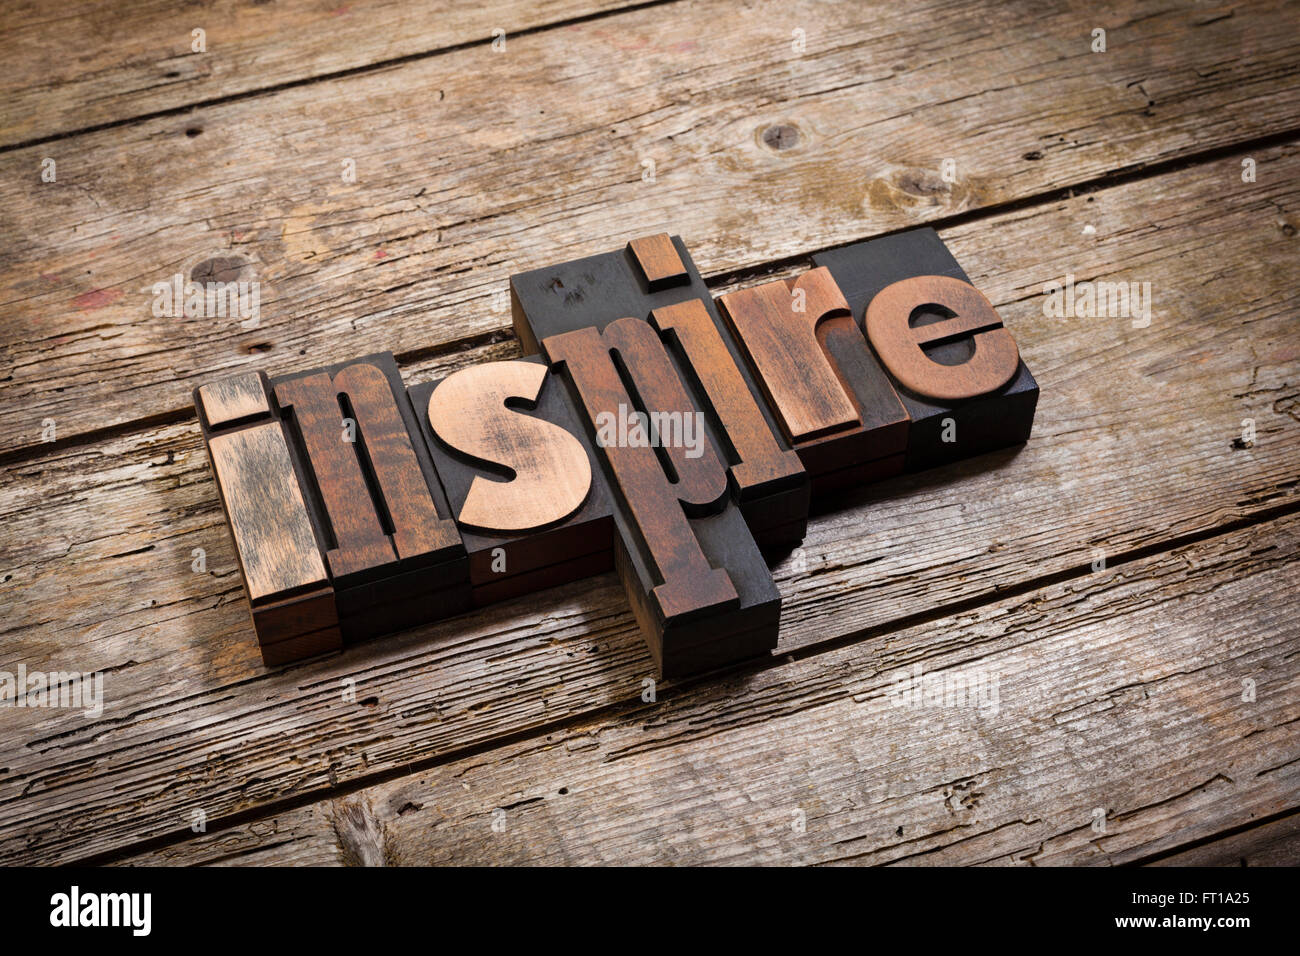 Inspire, word written with vintage letterpress printing blocks on rustic wooden background, angled view Stock Photo